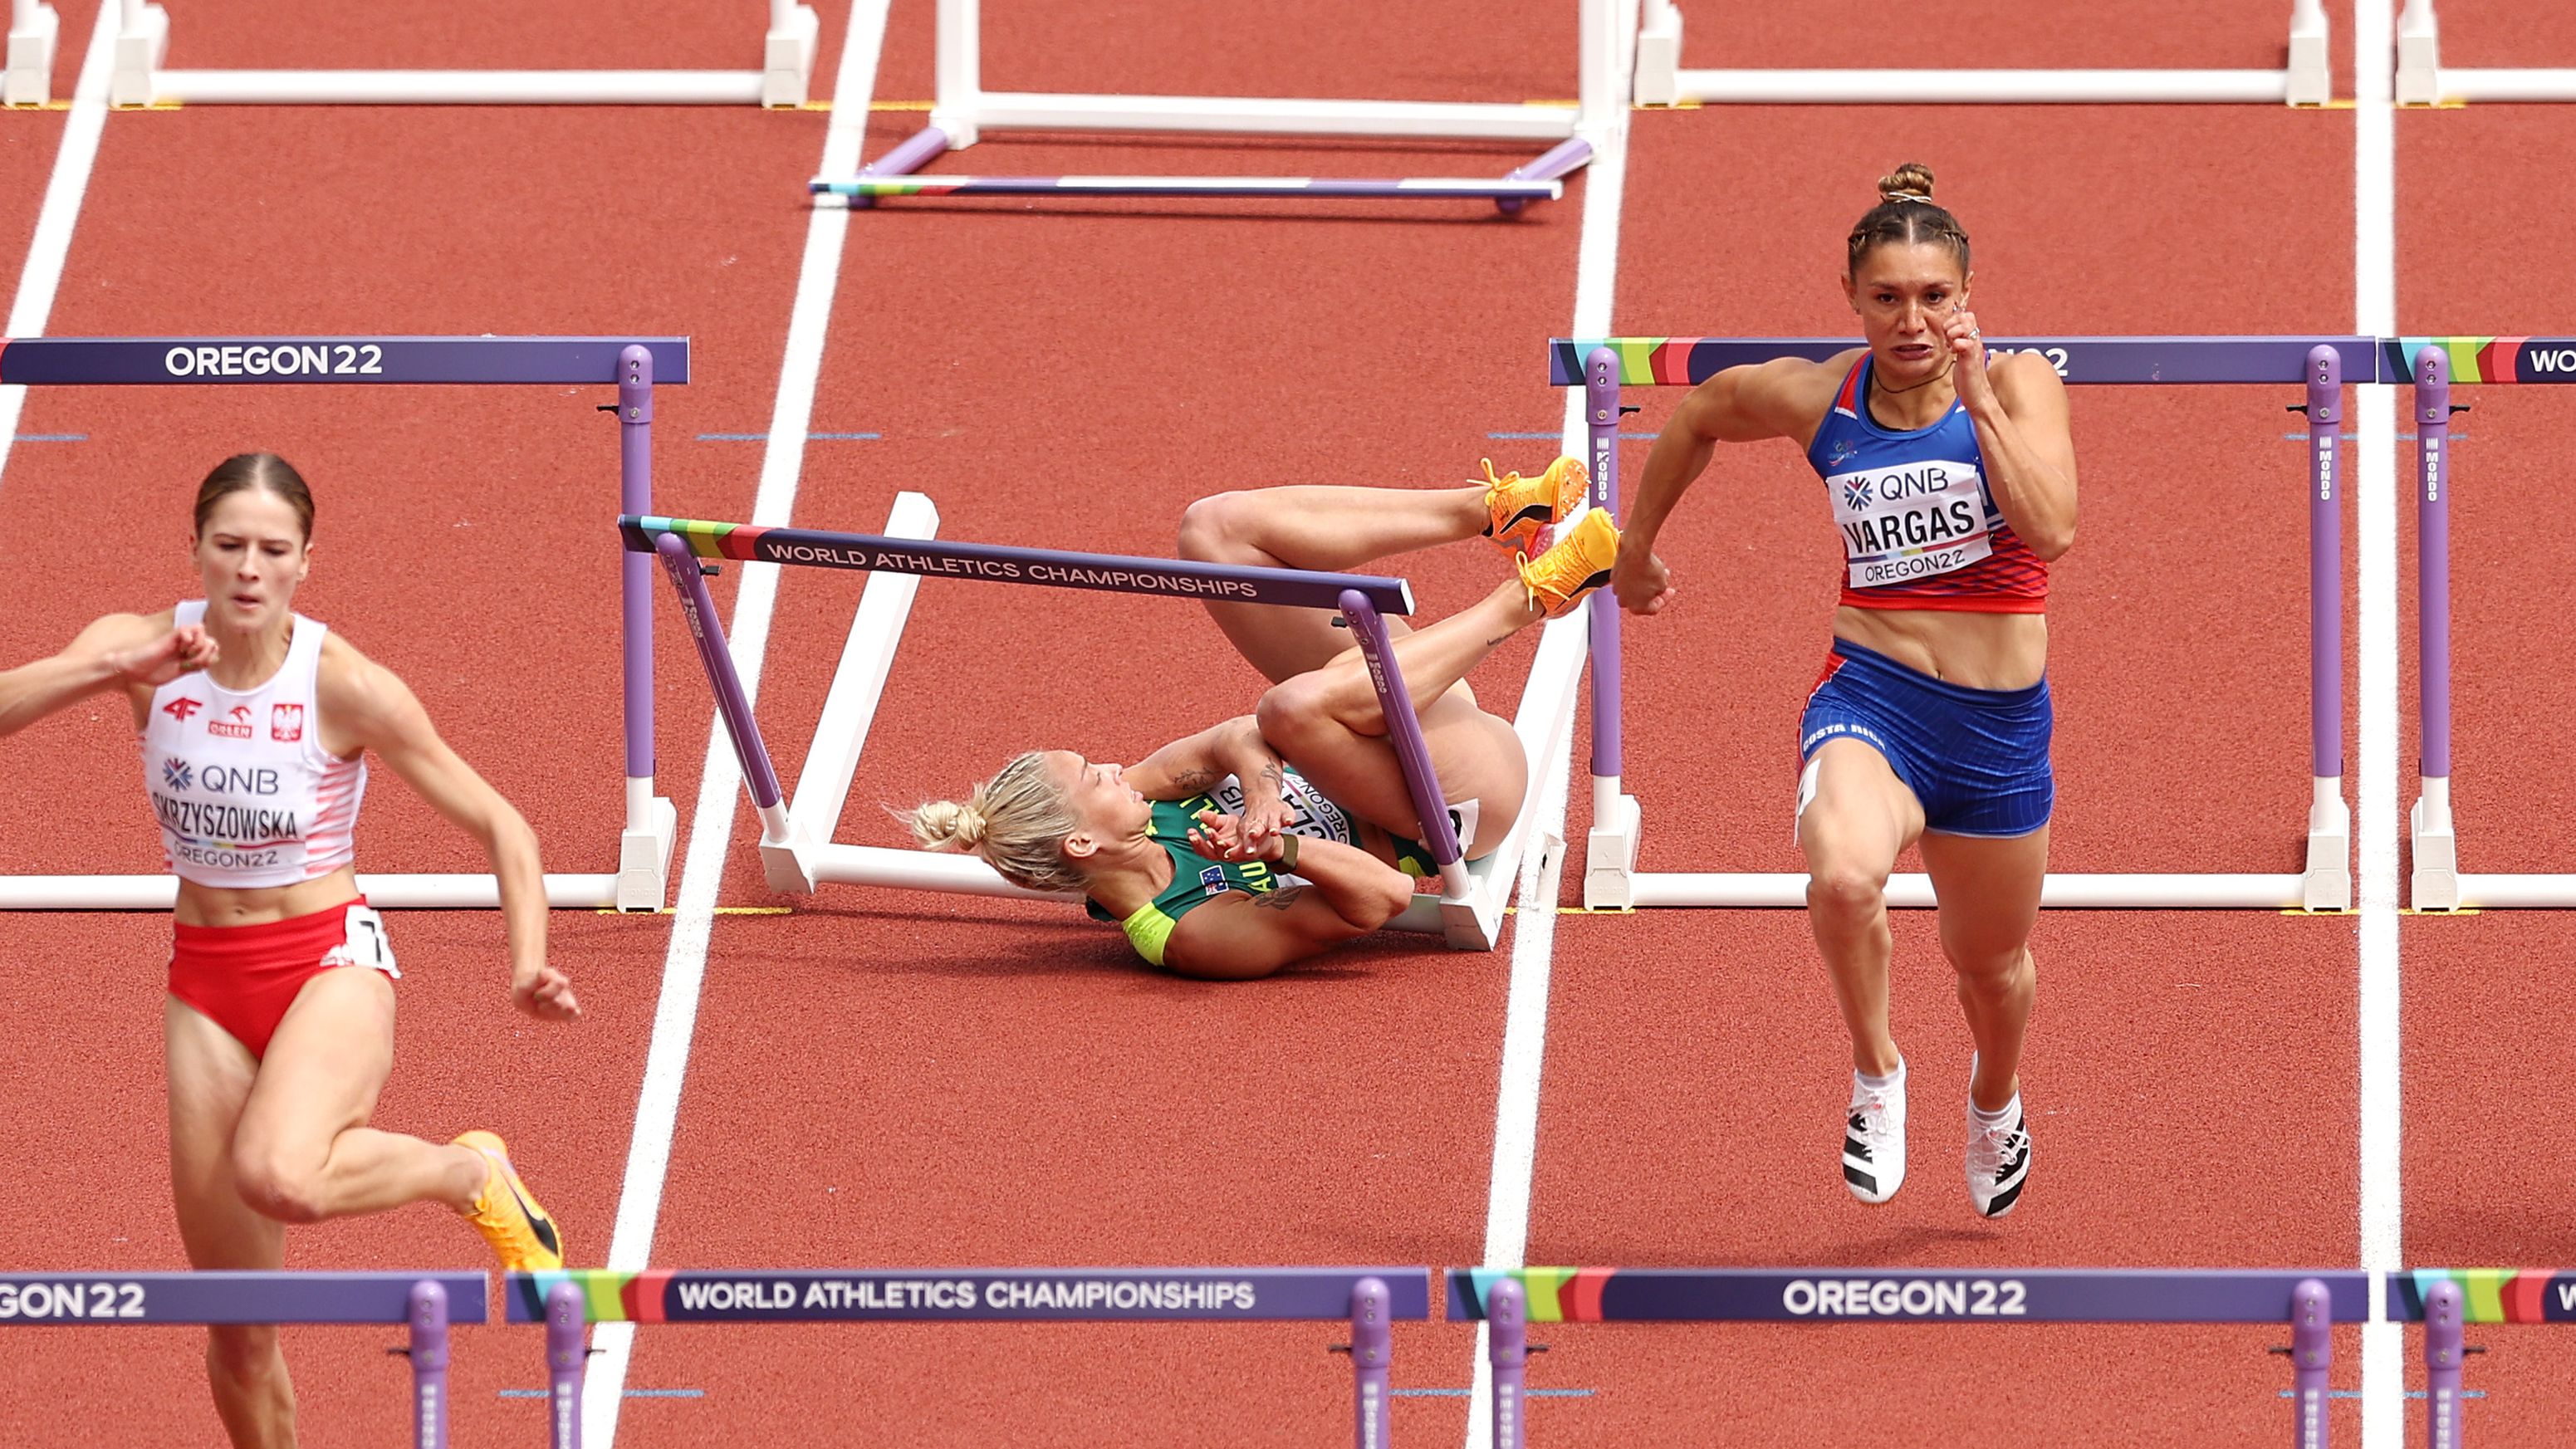 Australian hurdler Liz Clay likely to miss Commonwealth Games after heavy fall during world champs heat